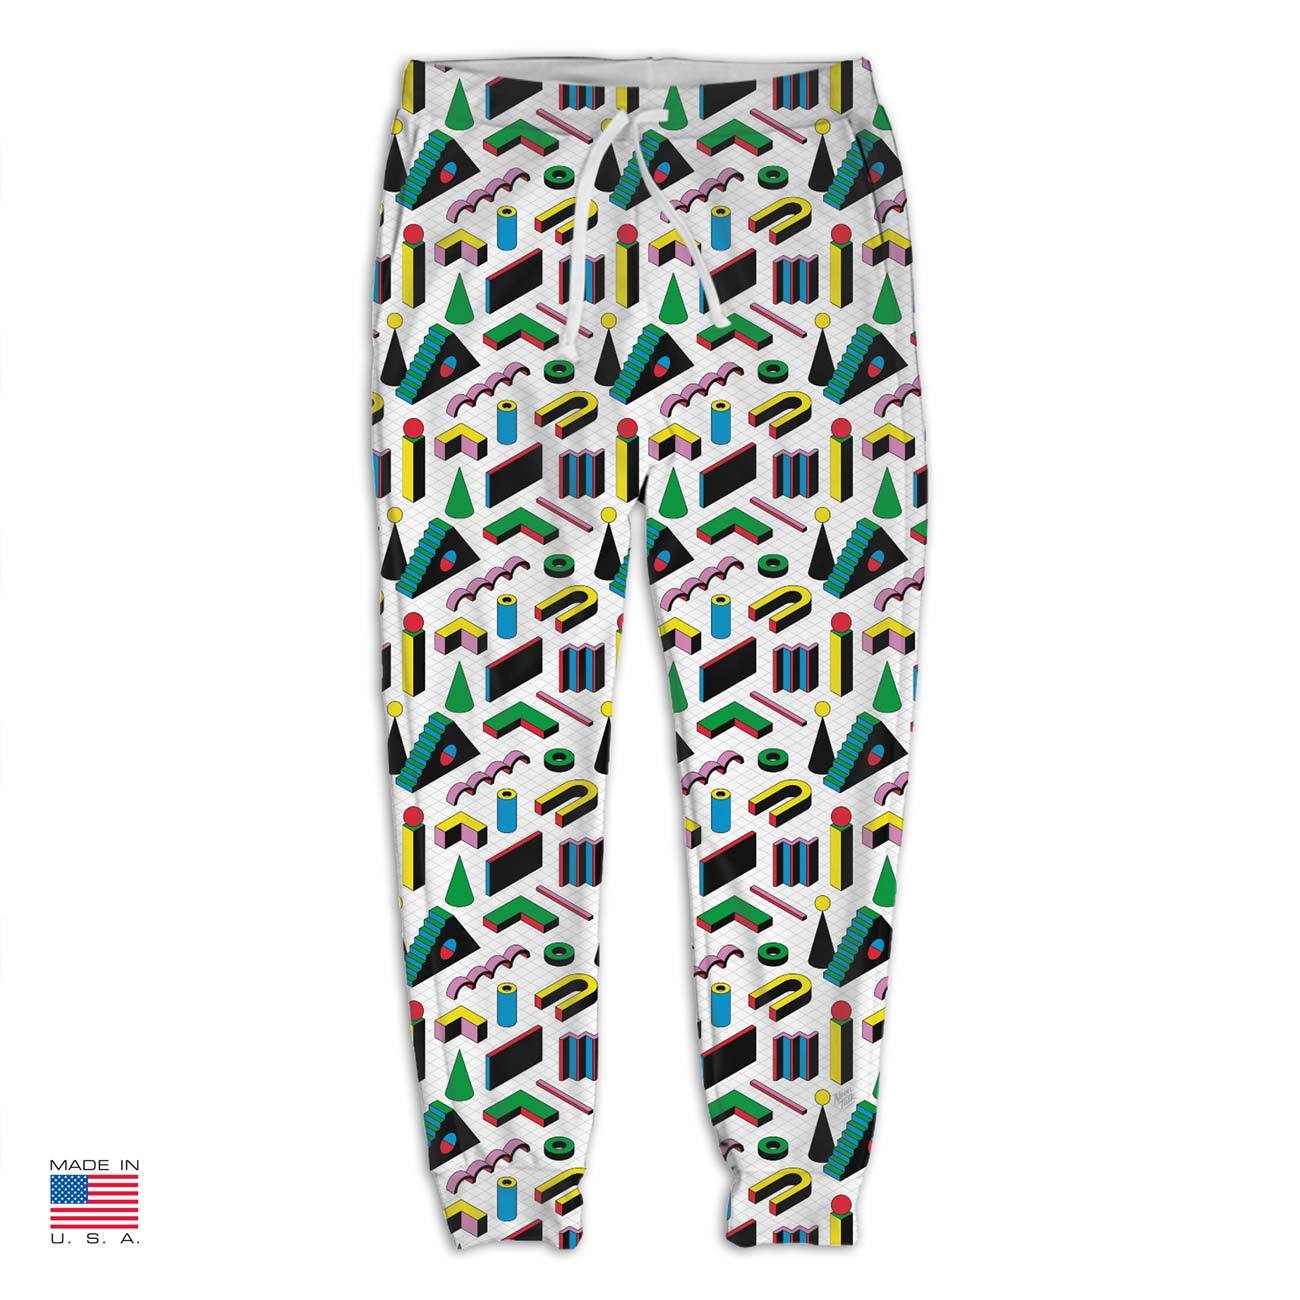 Labyrinth White Joggers by Vengodelvalle